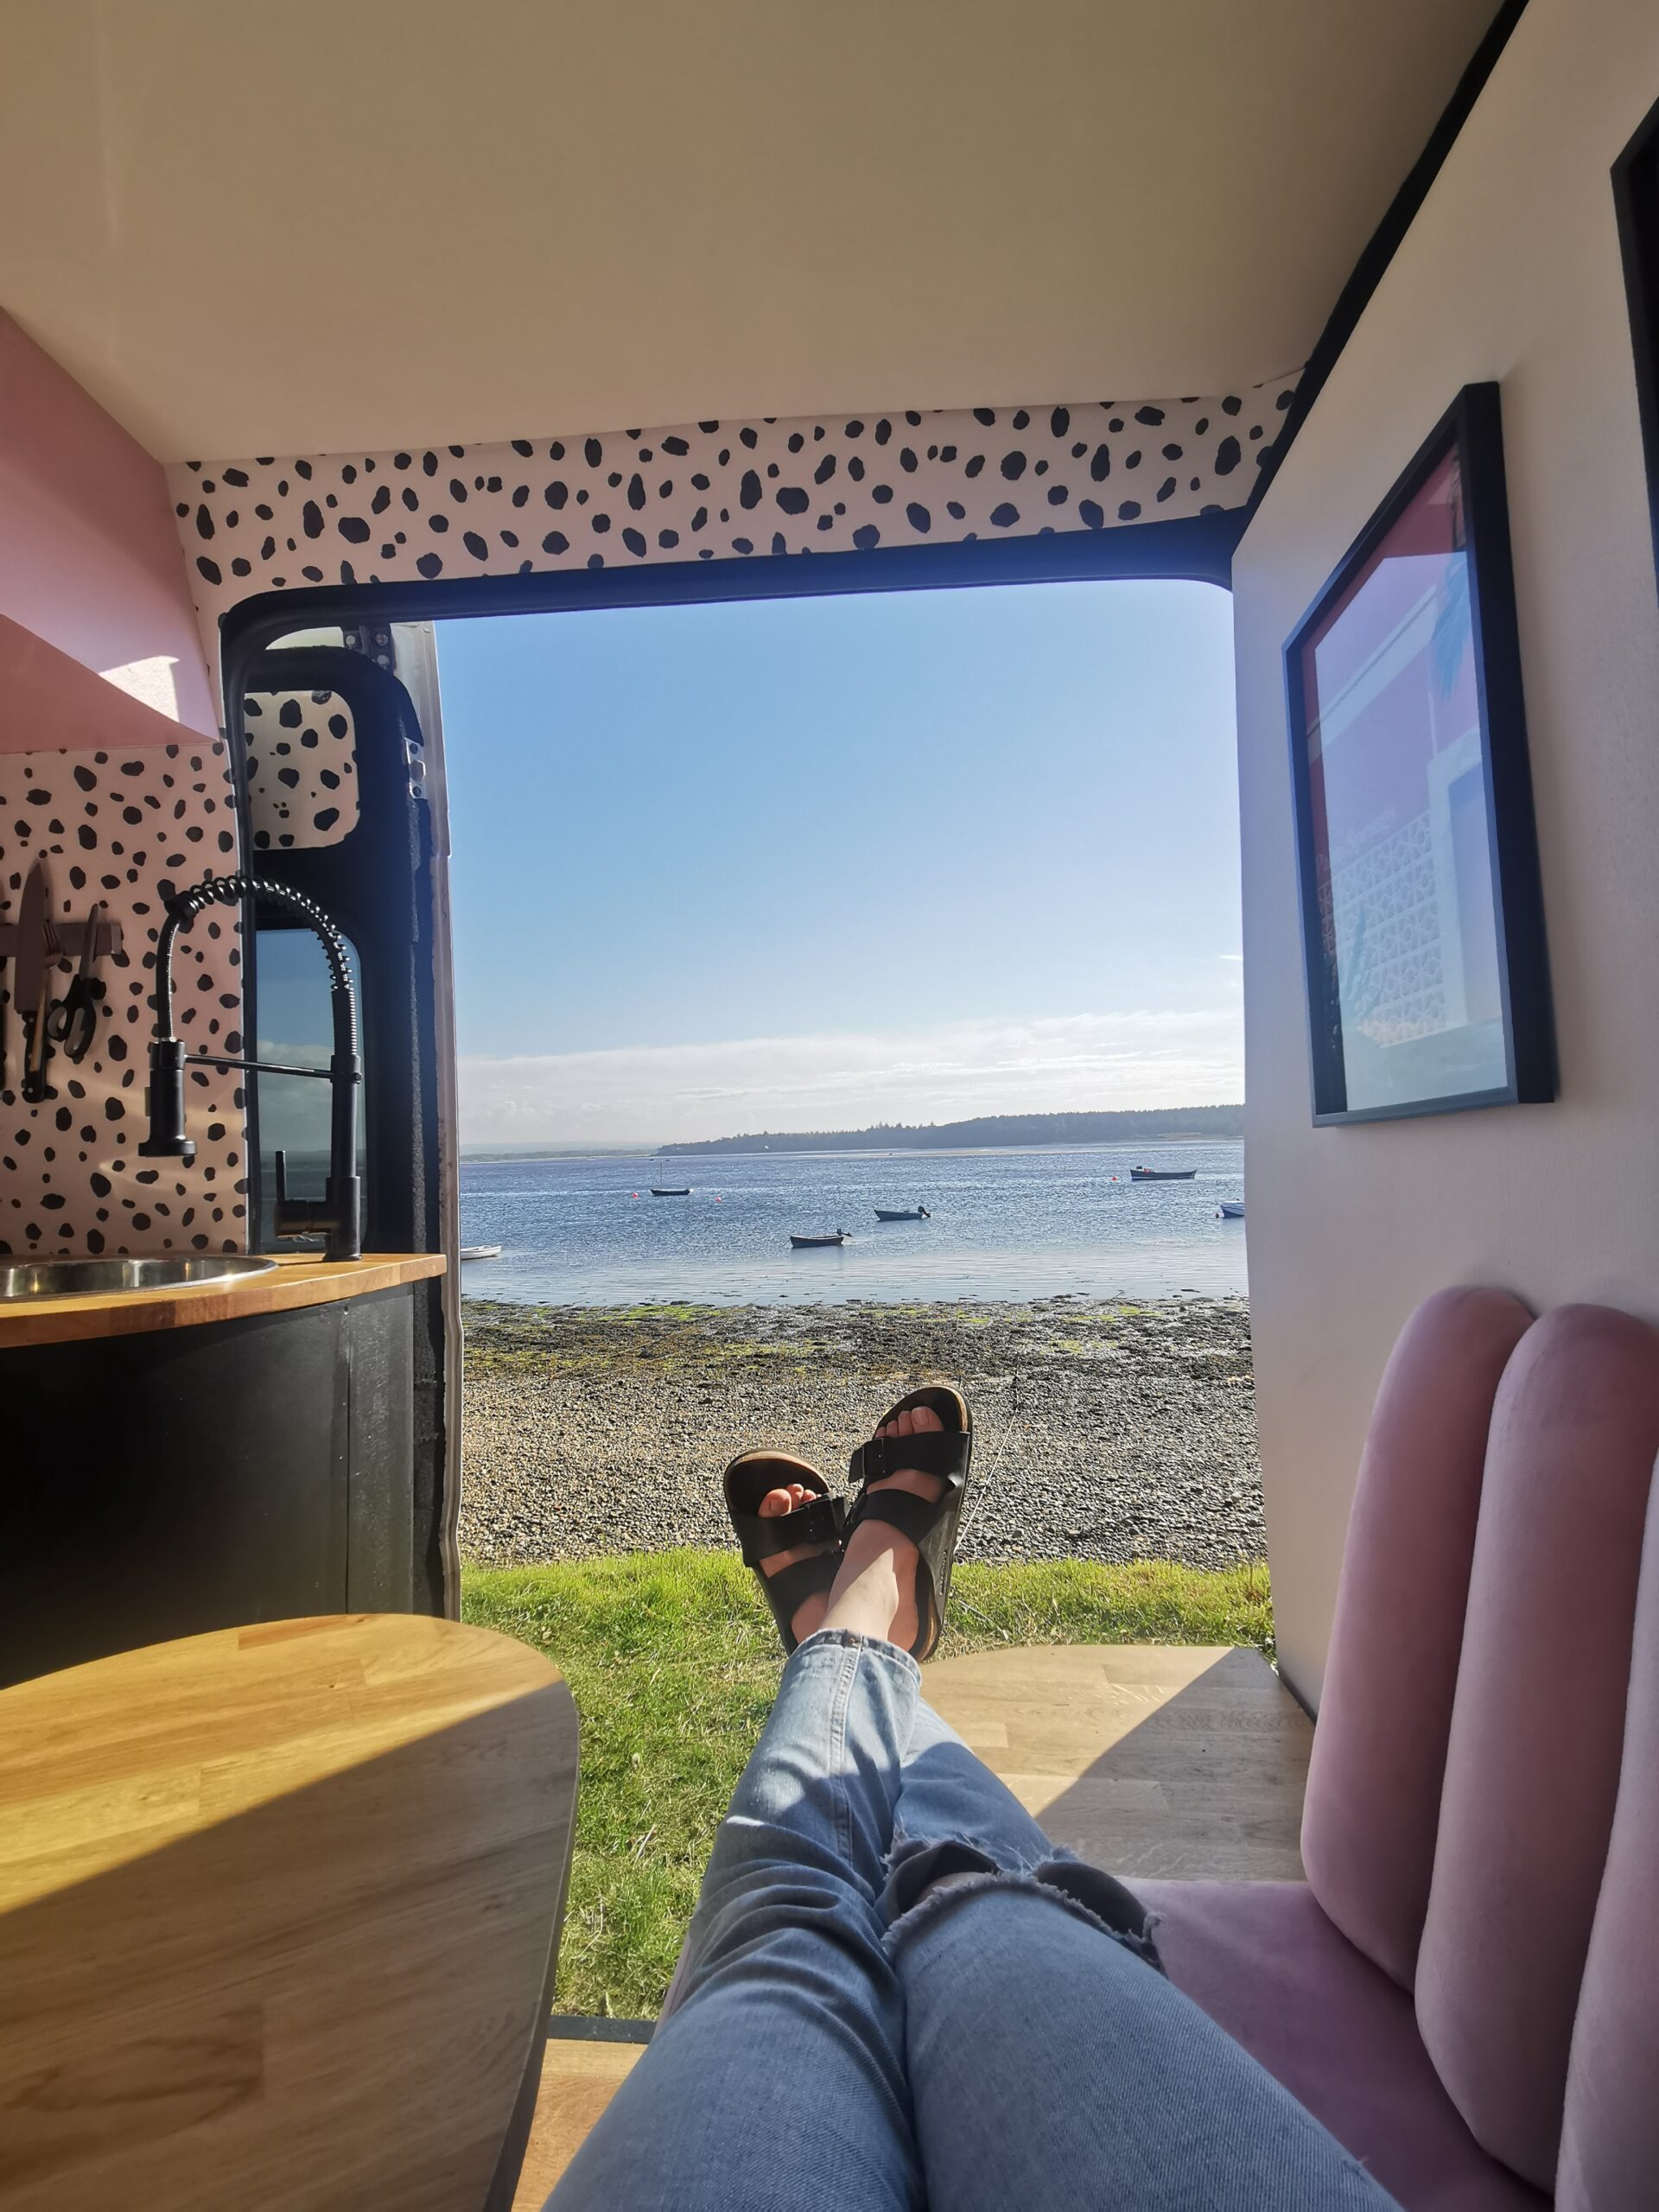 A view from the location we chose to park in Findhorn. The image is from inside the van looking out over Findhorn Bay.